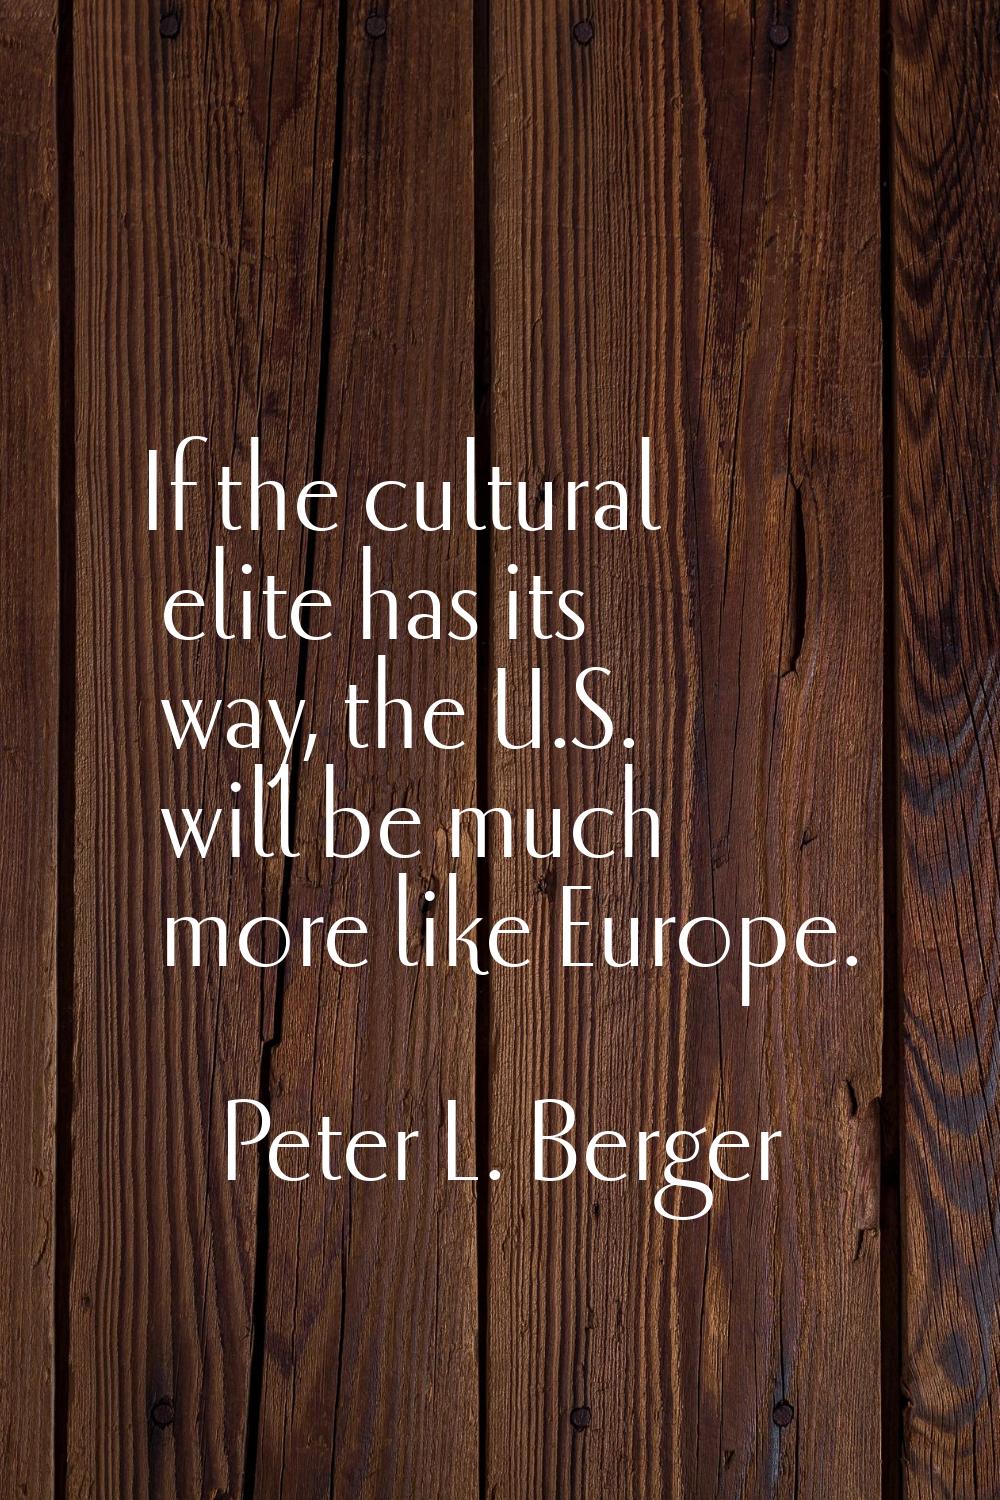 If the cultural elite has its way, the U.S. will be much more like Europe.